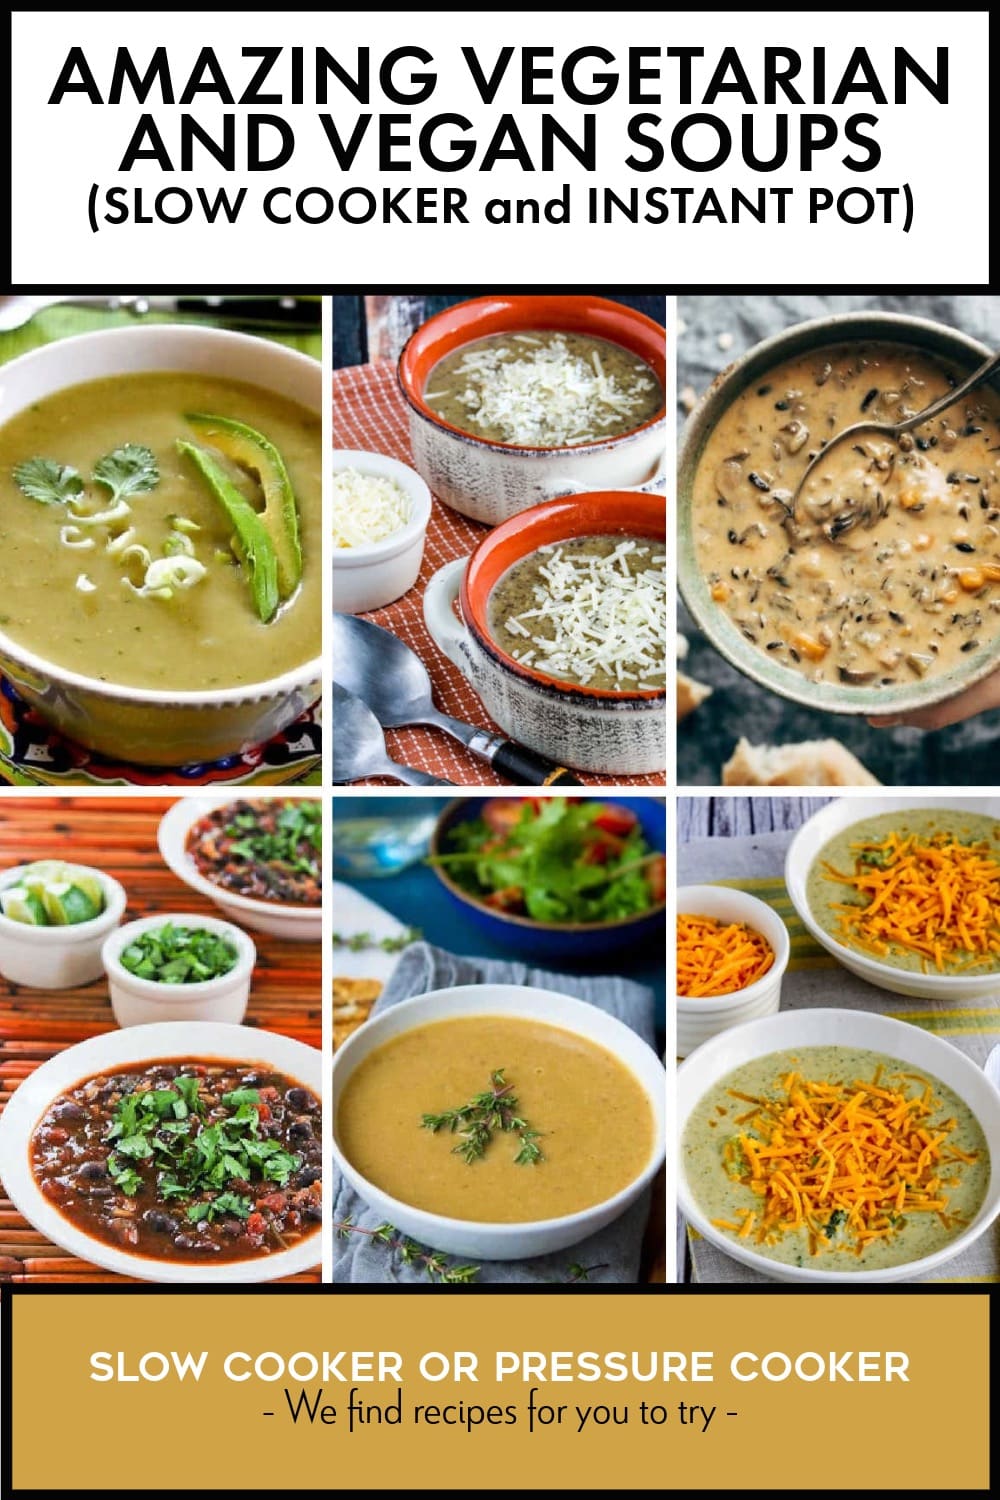 Pinterest image of Amazing Vegetarian and Vegan Soups (Slow Cooker and Instant Pot)